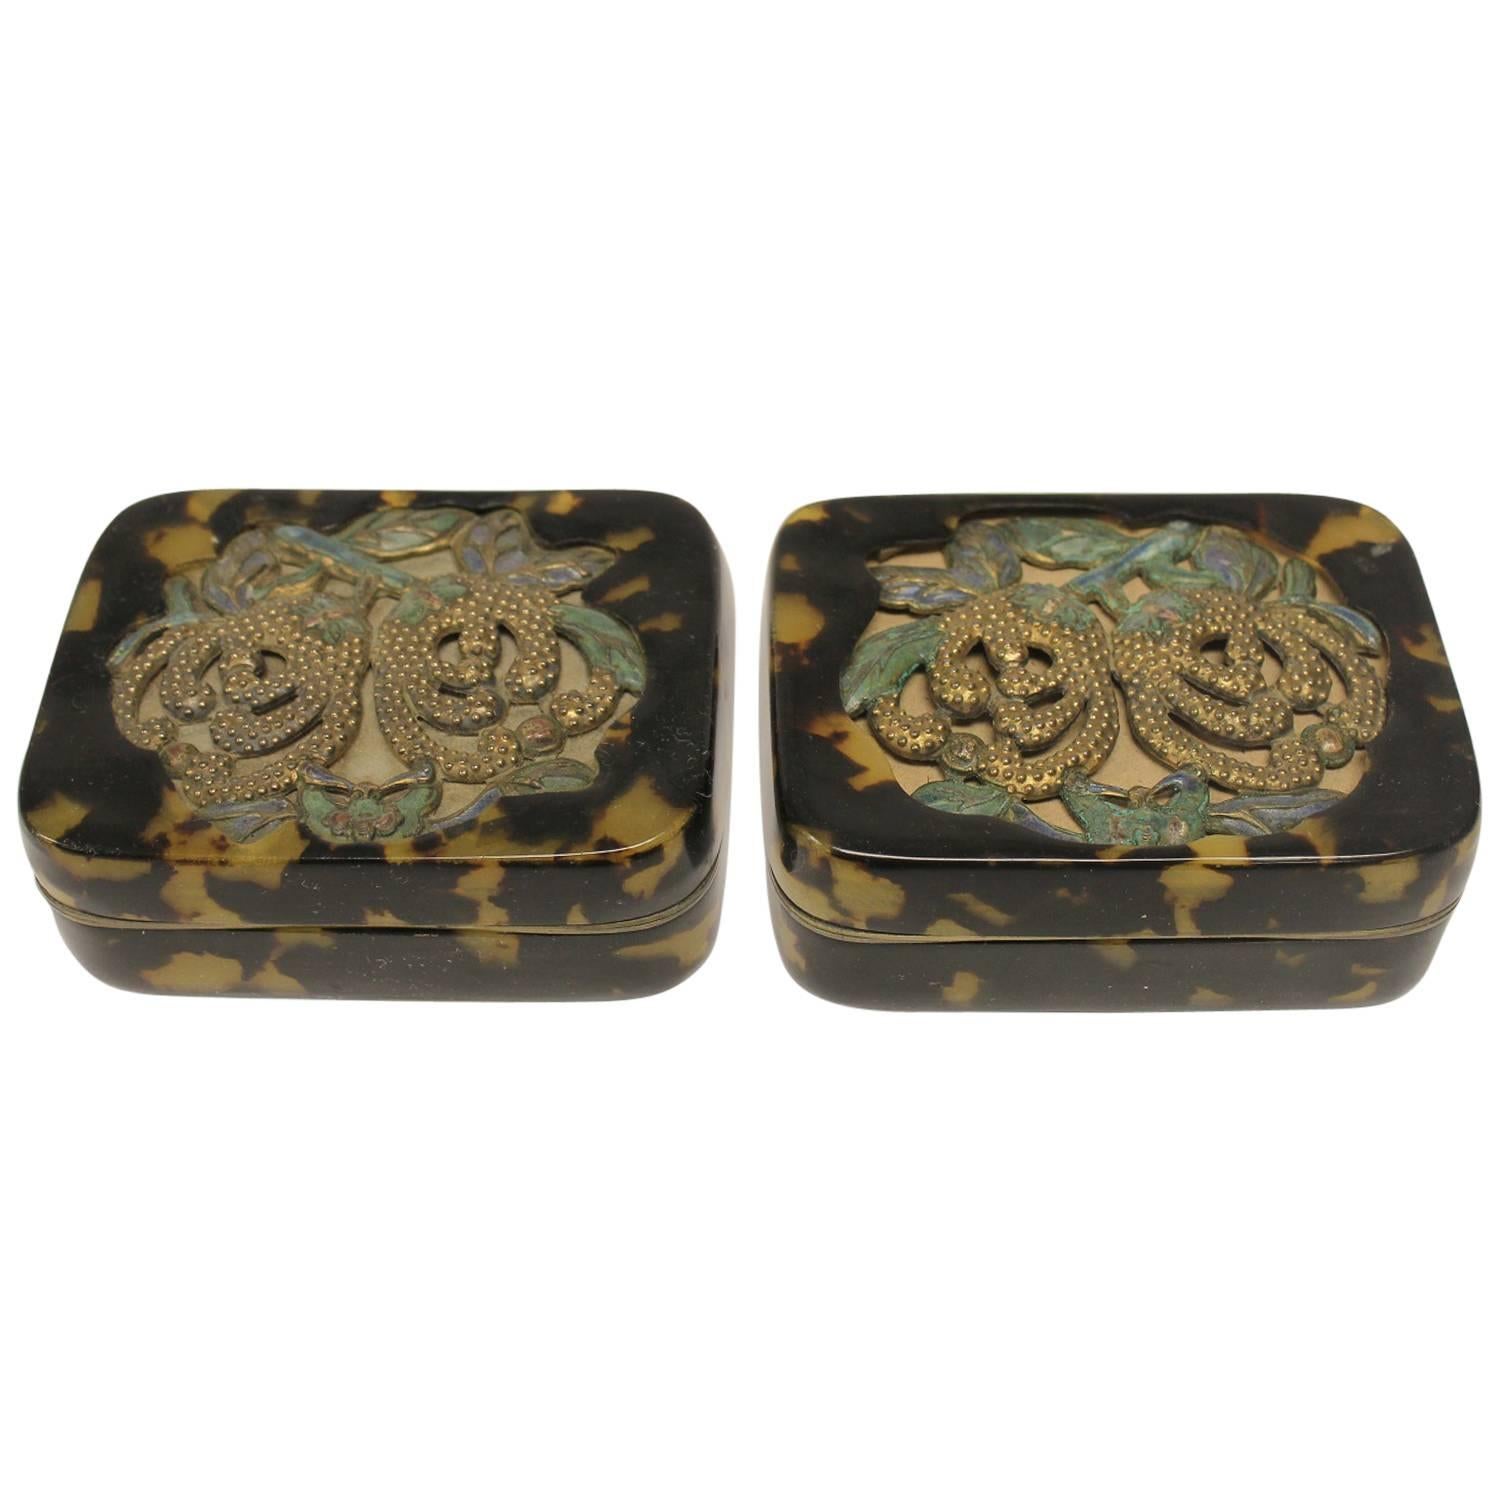 Pair Of Antique Chinese Decorative Tortoise Shell Overlay Boxes For Sale